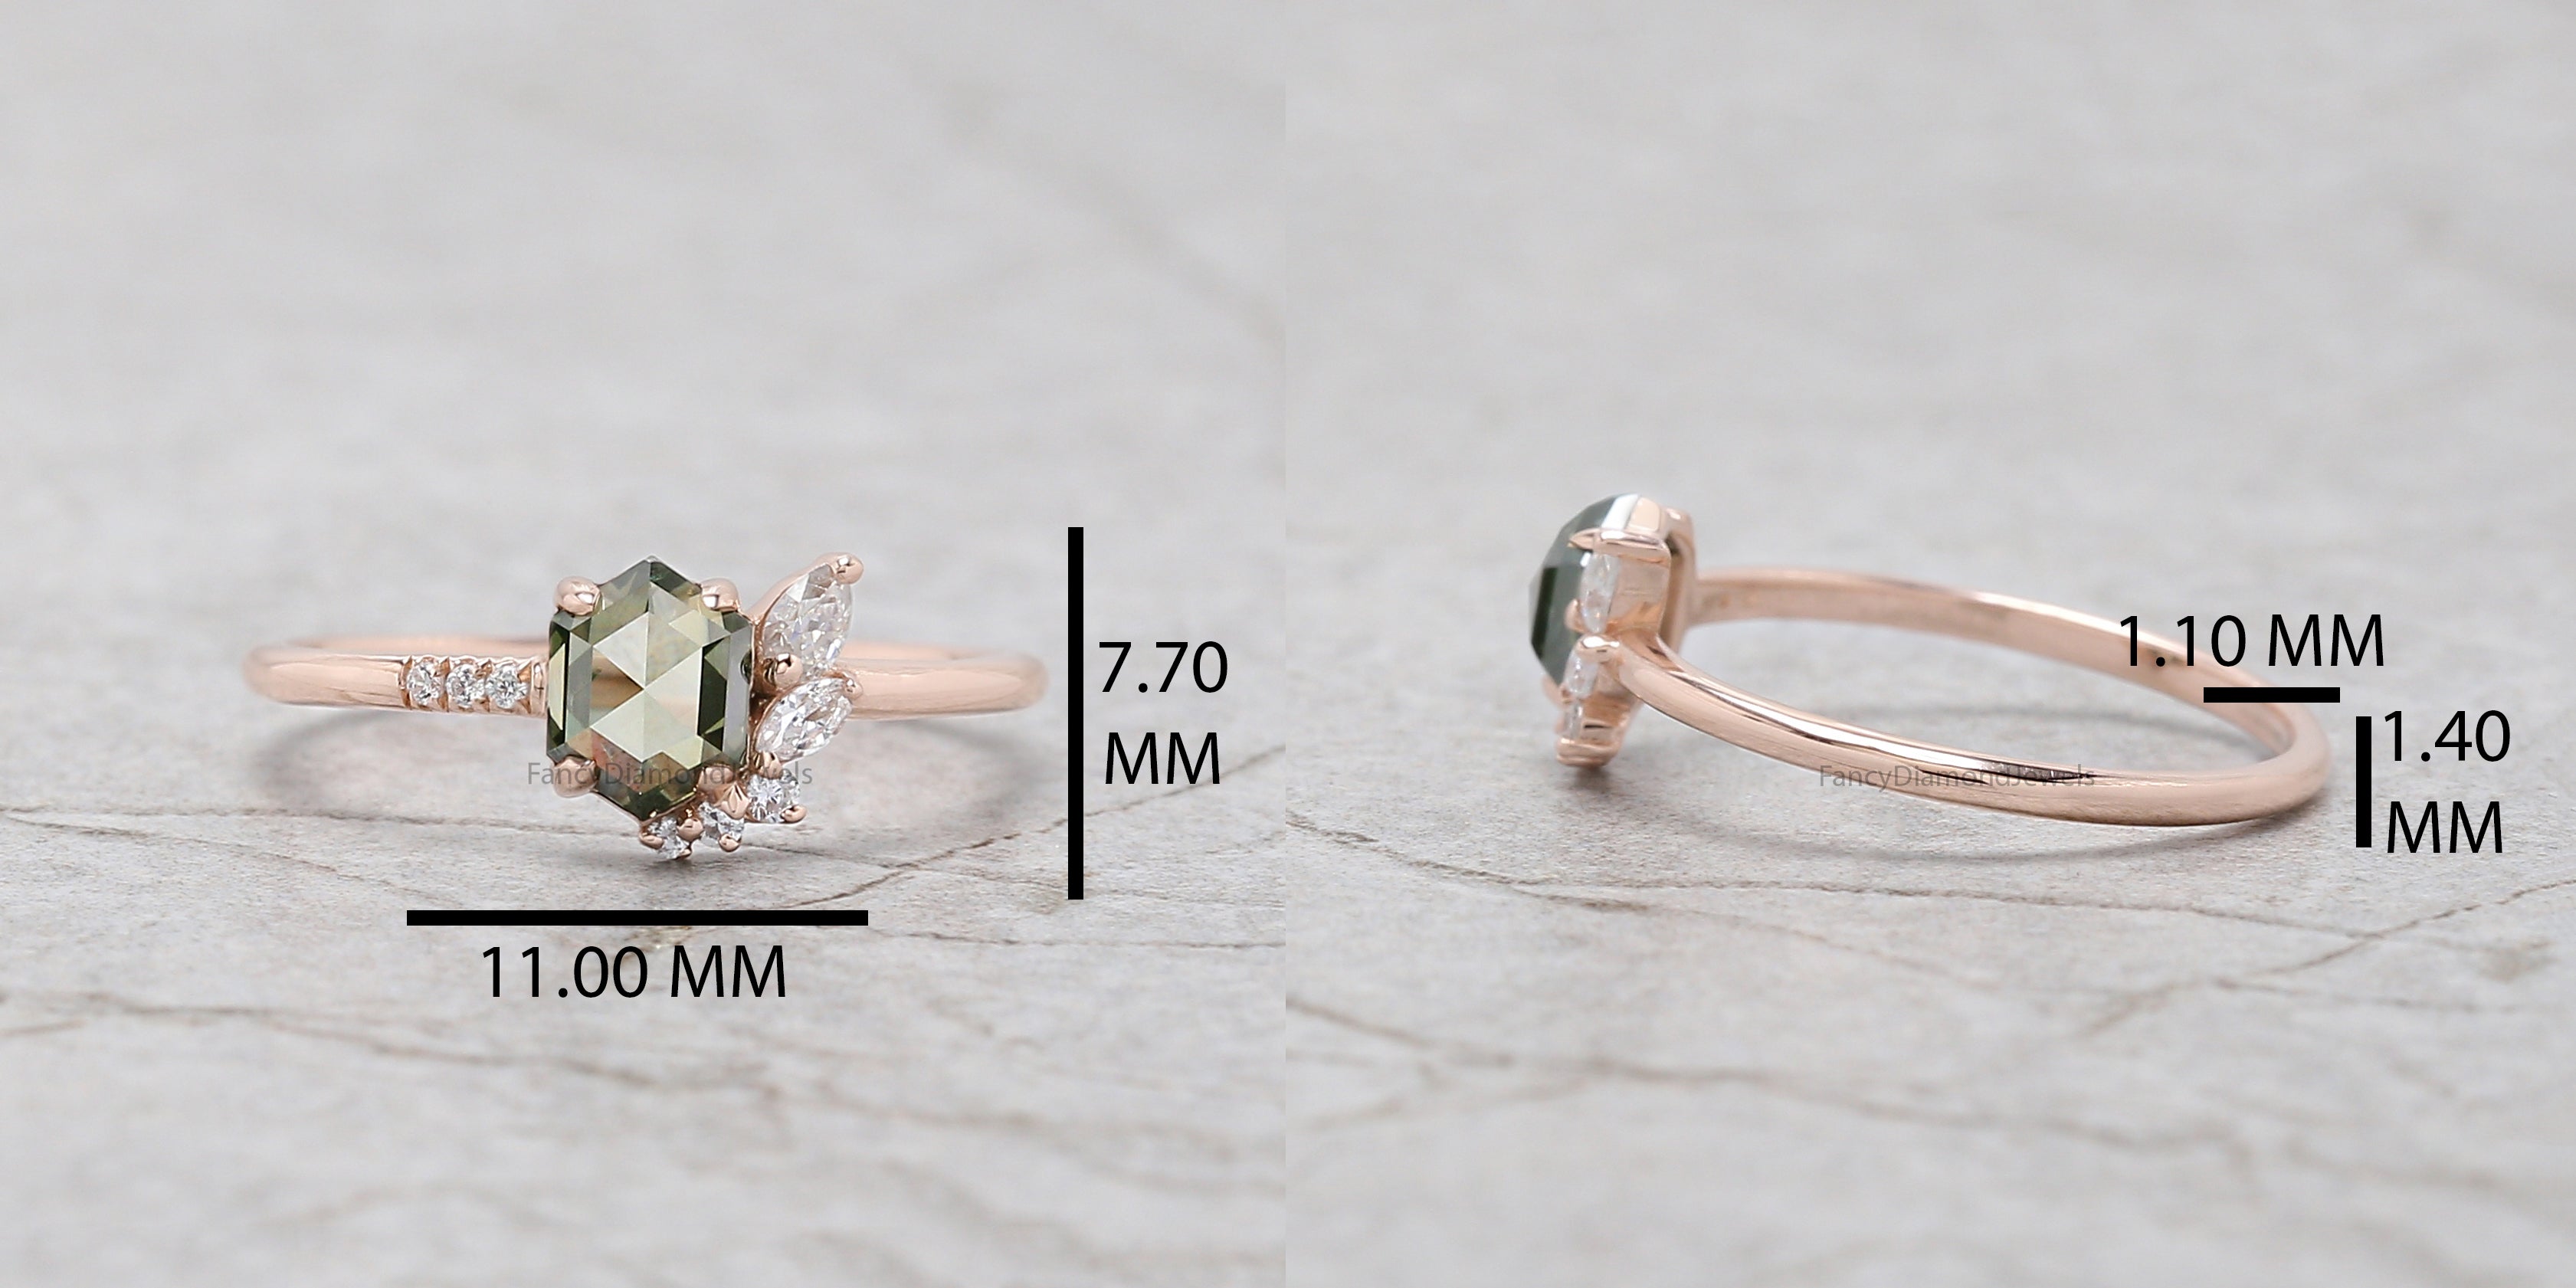 Hexagon Cut Green Color Diamond Ring 0.72 Ct 6.19 MM Hexagon Cut Diamond Ring 14K Rose Gold Silver Engagement Ring Gift For Her QL2438